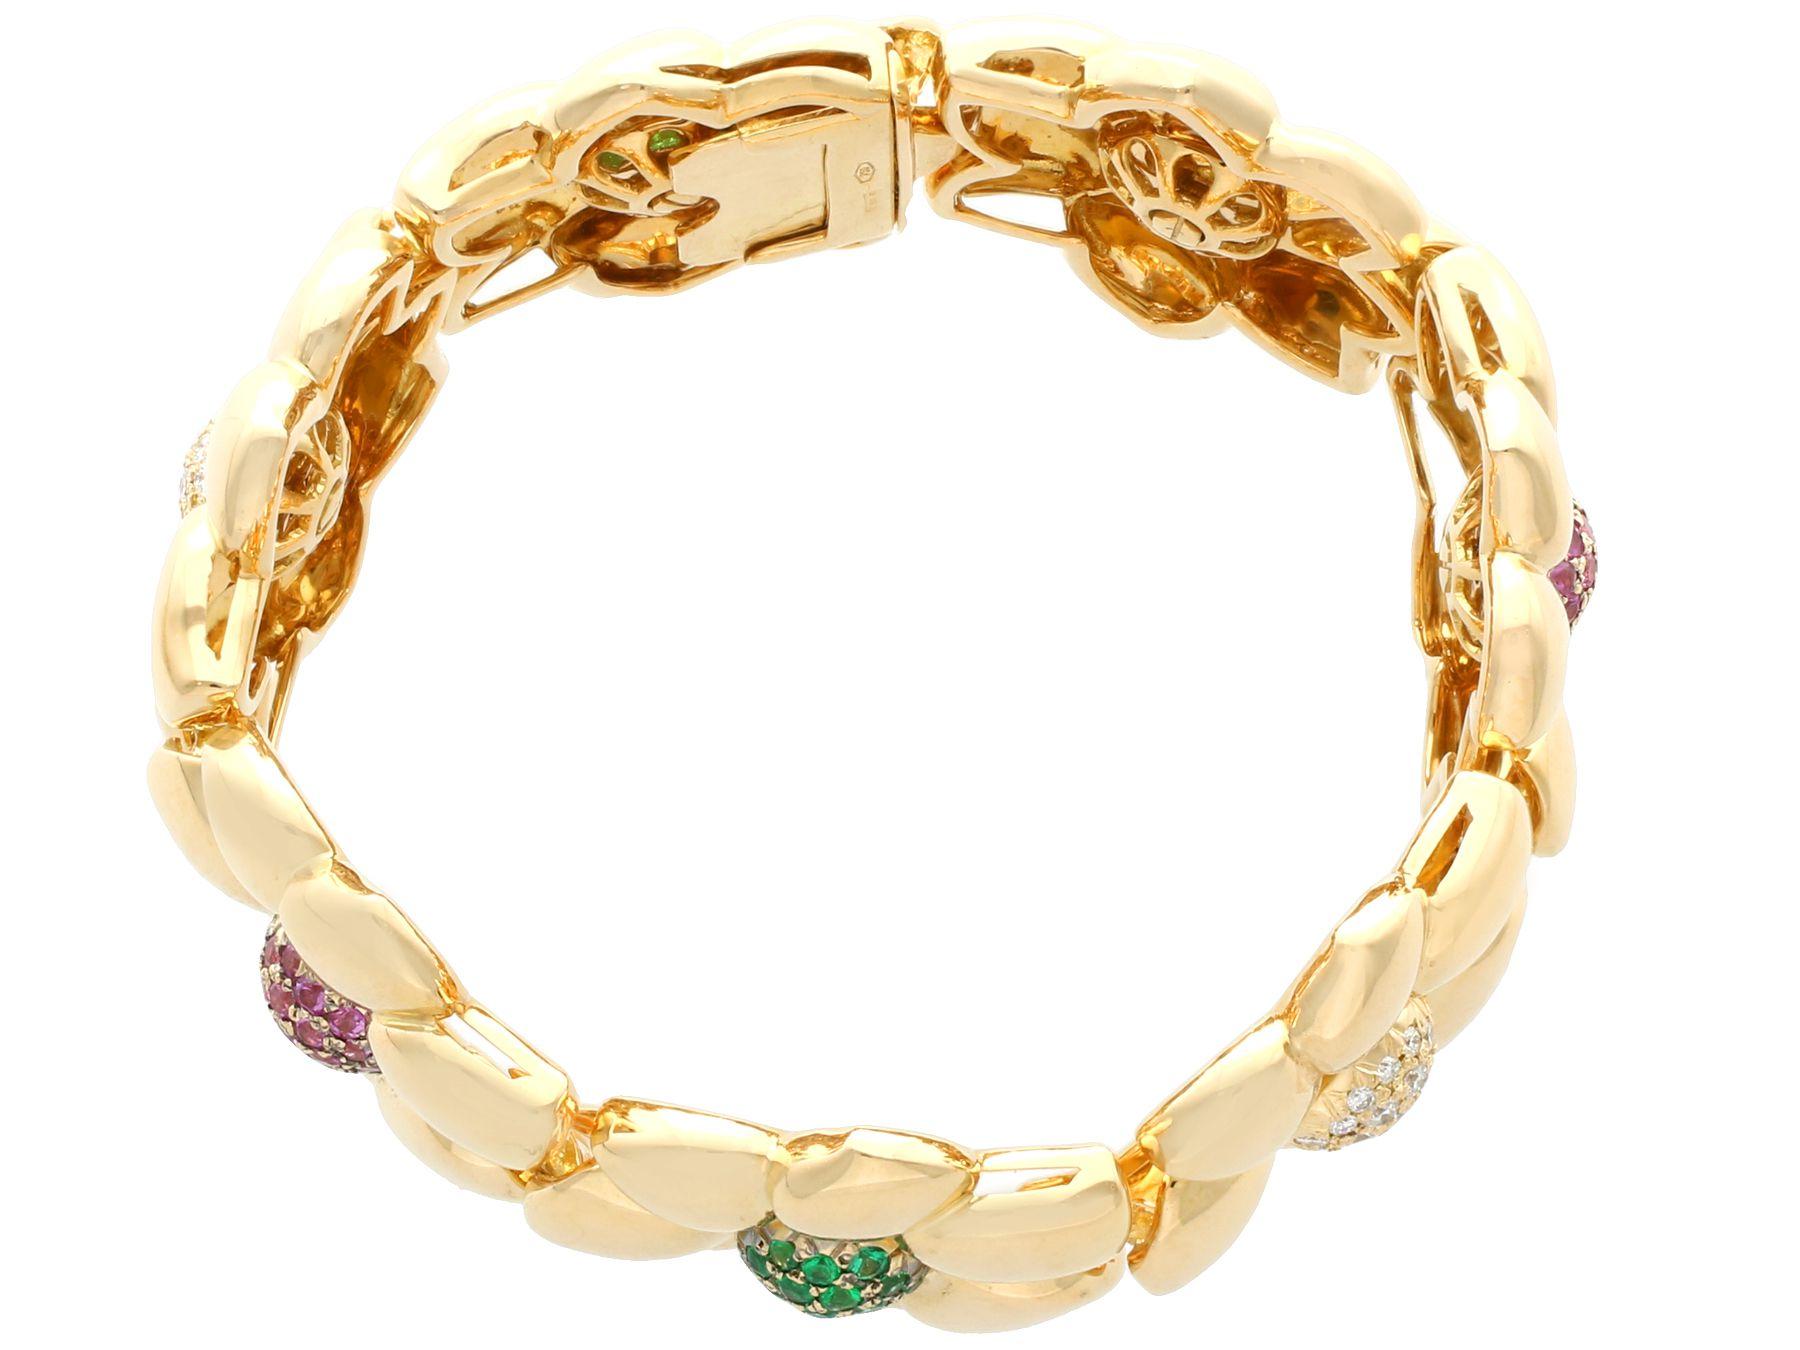 Vintage Ruby Emerald and Diamond Yellow Gold Bracelet In Excellent Condition For Sale In Jesmond, Newcastle Upon Tyne